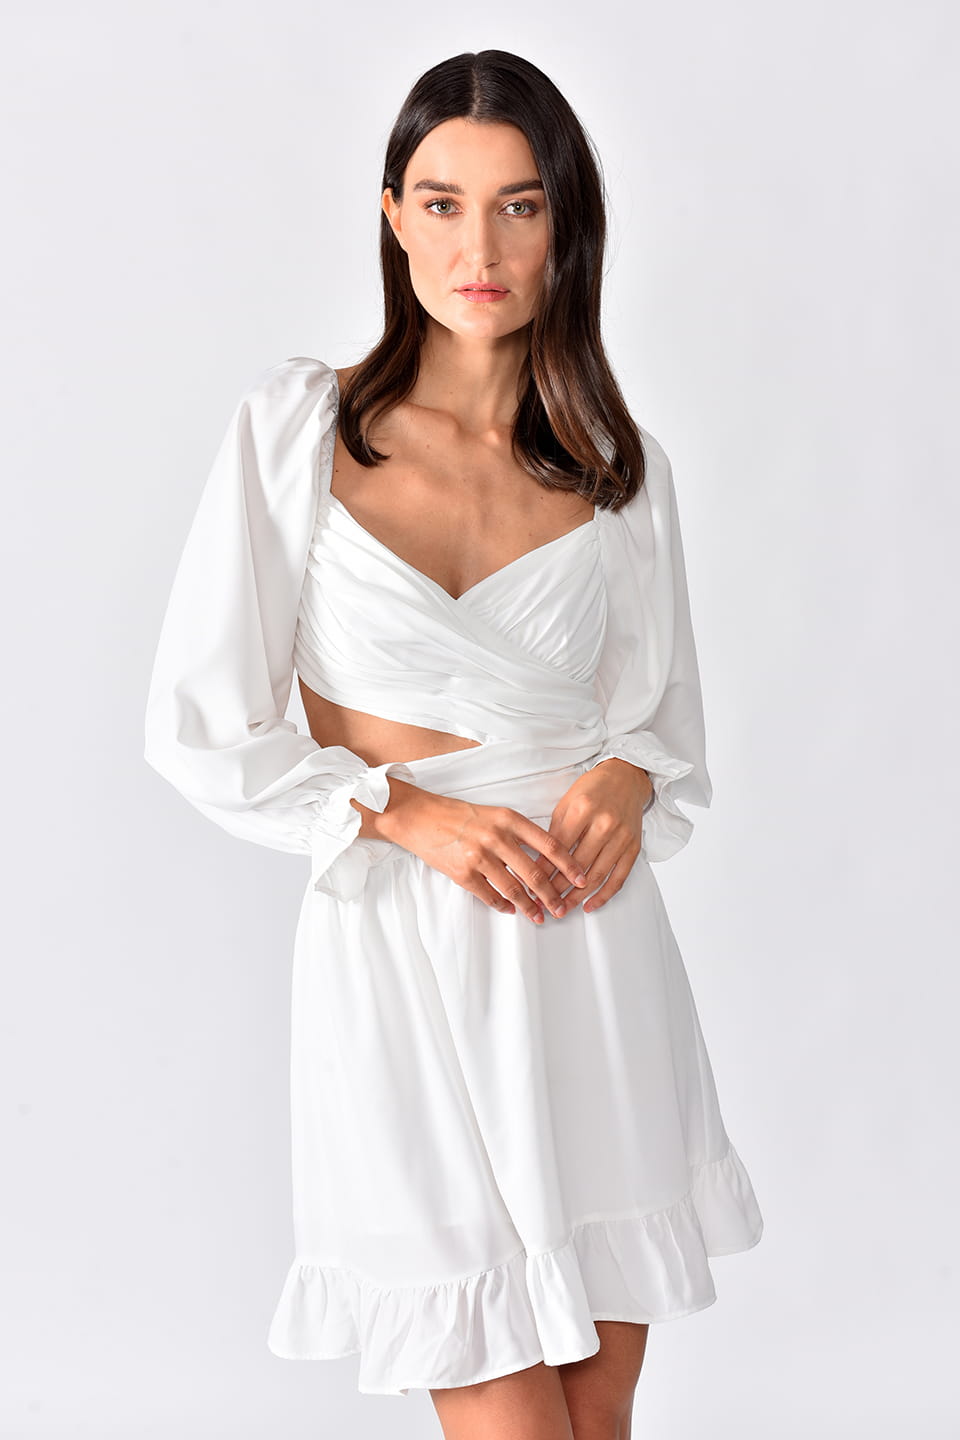 Fashion dress in white color from Online shop in UAE. Long sleeve short dress for pool party.